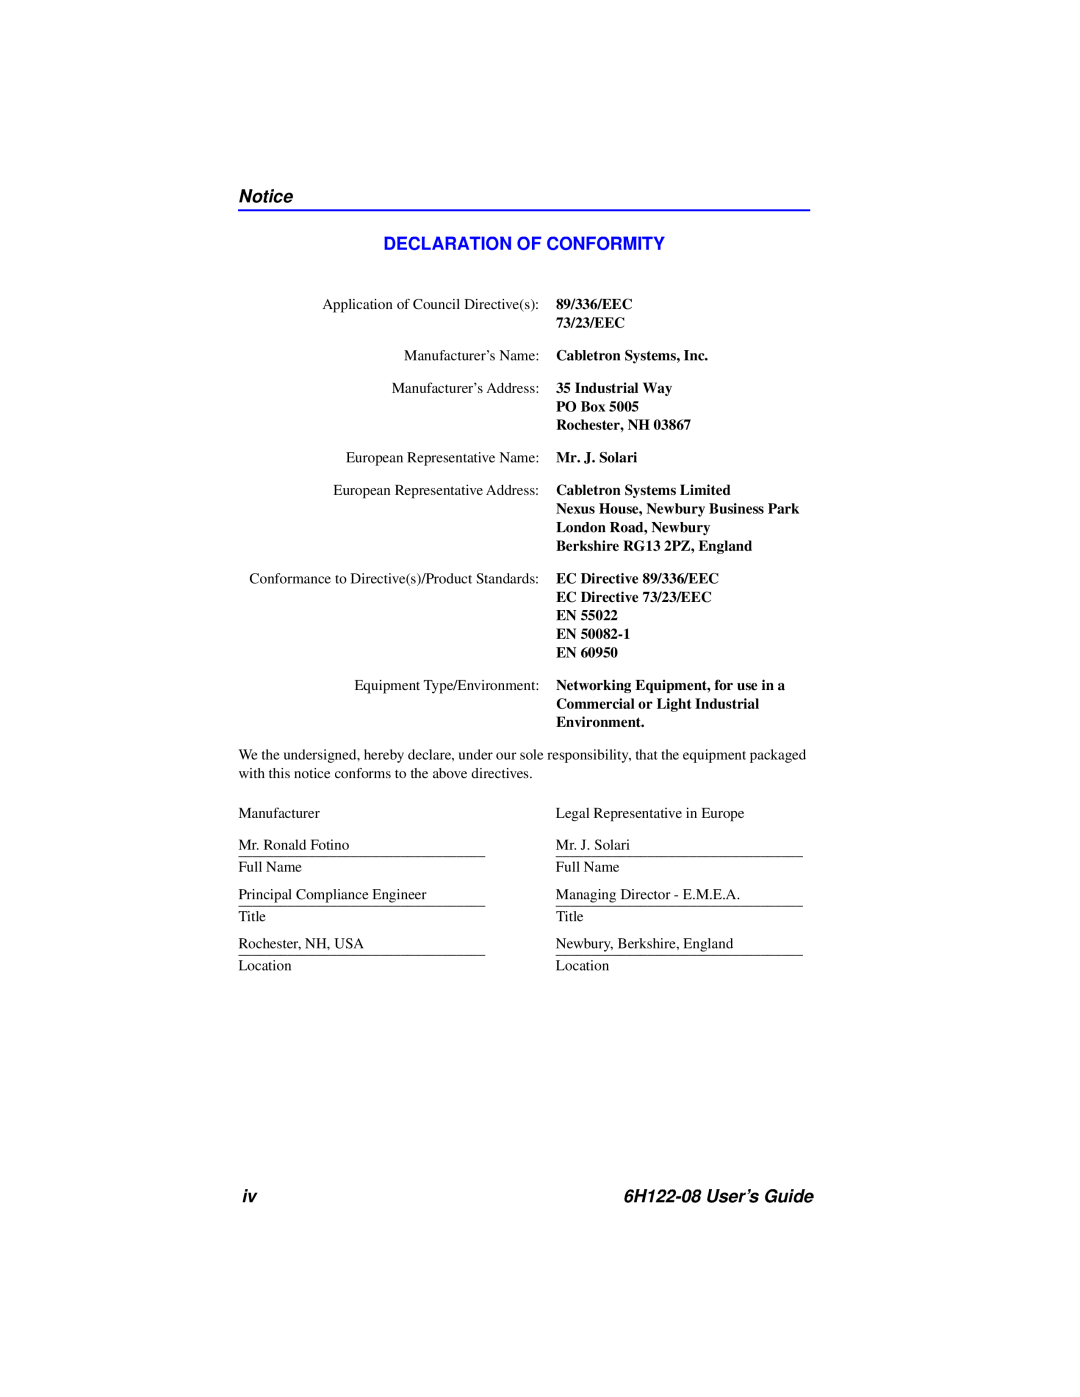 Cabletron Systems manual Declaration Of Conformity, 6H122-08 User’s Guide 